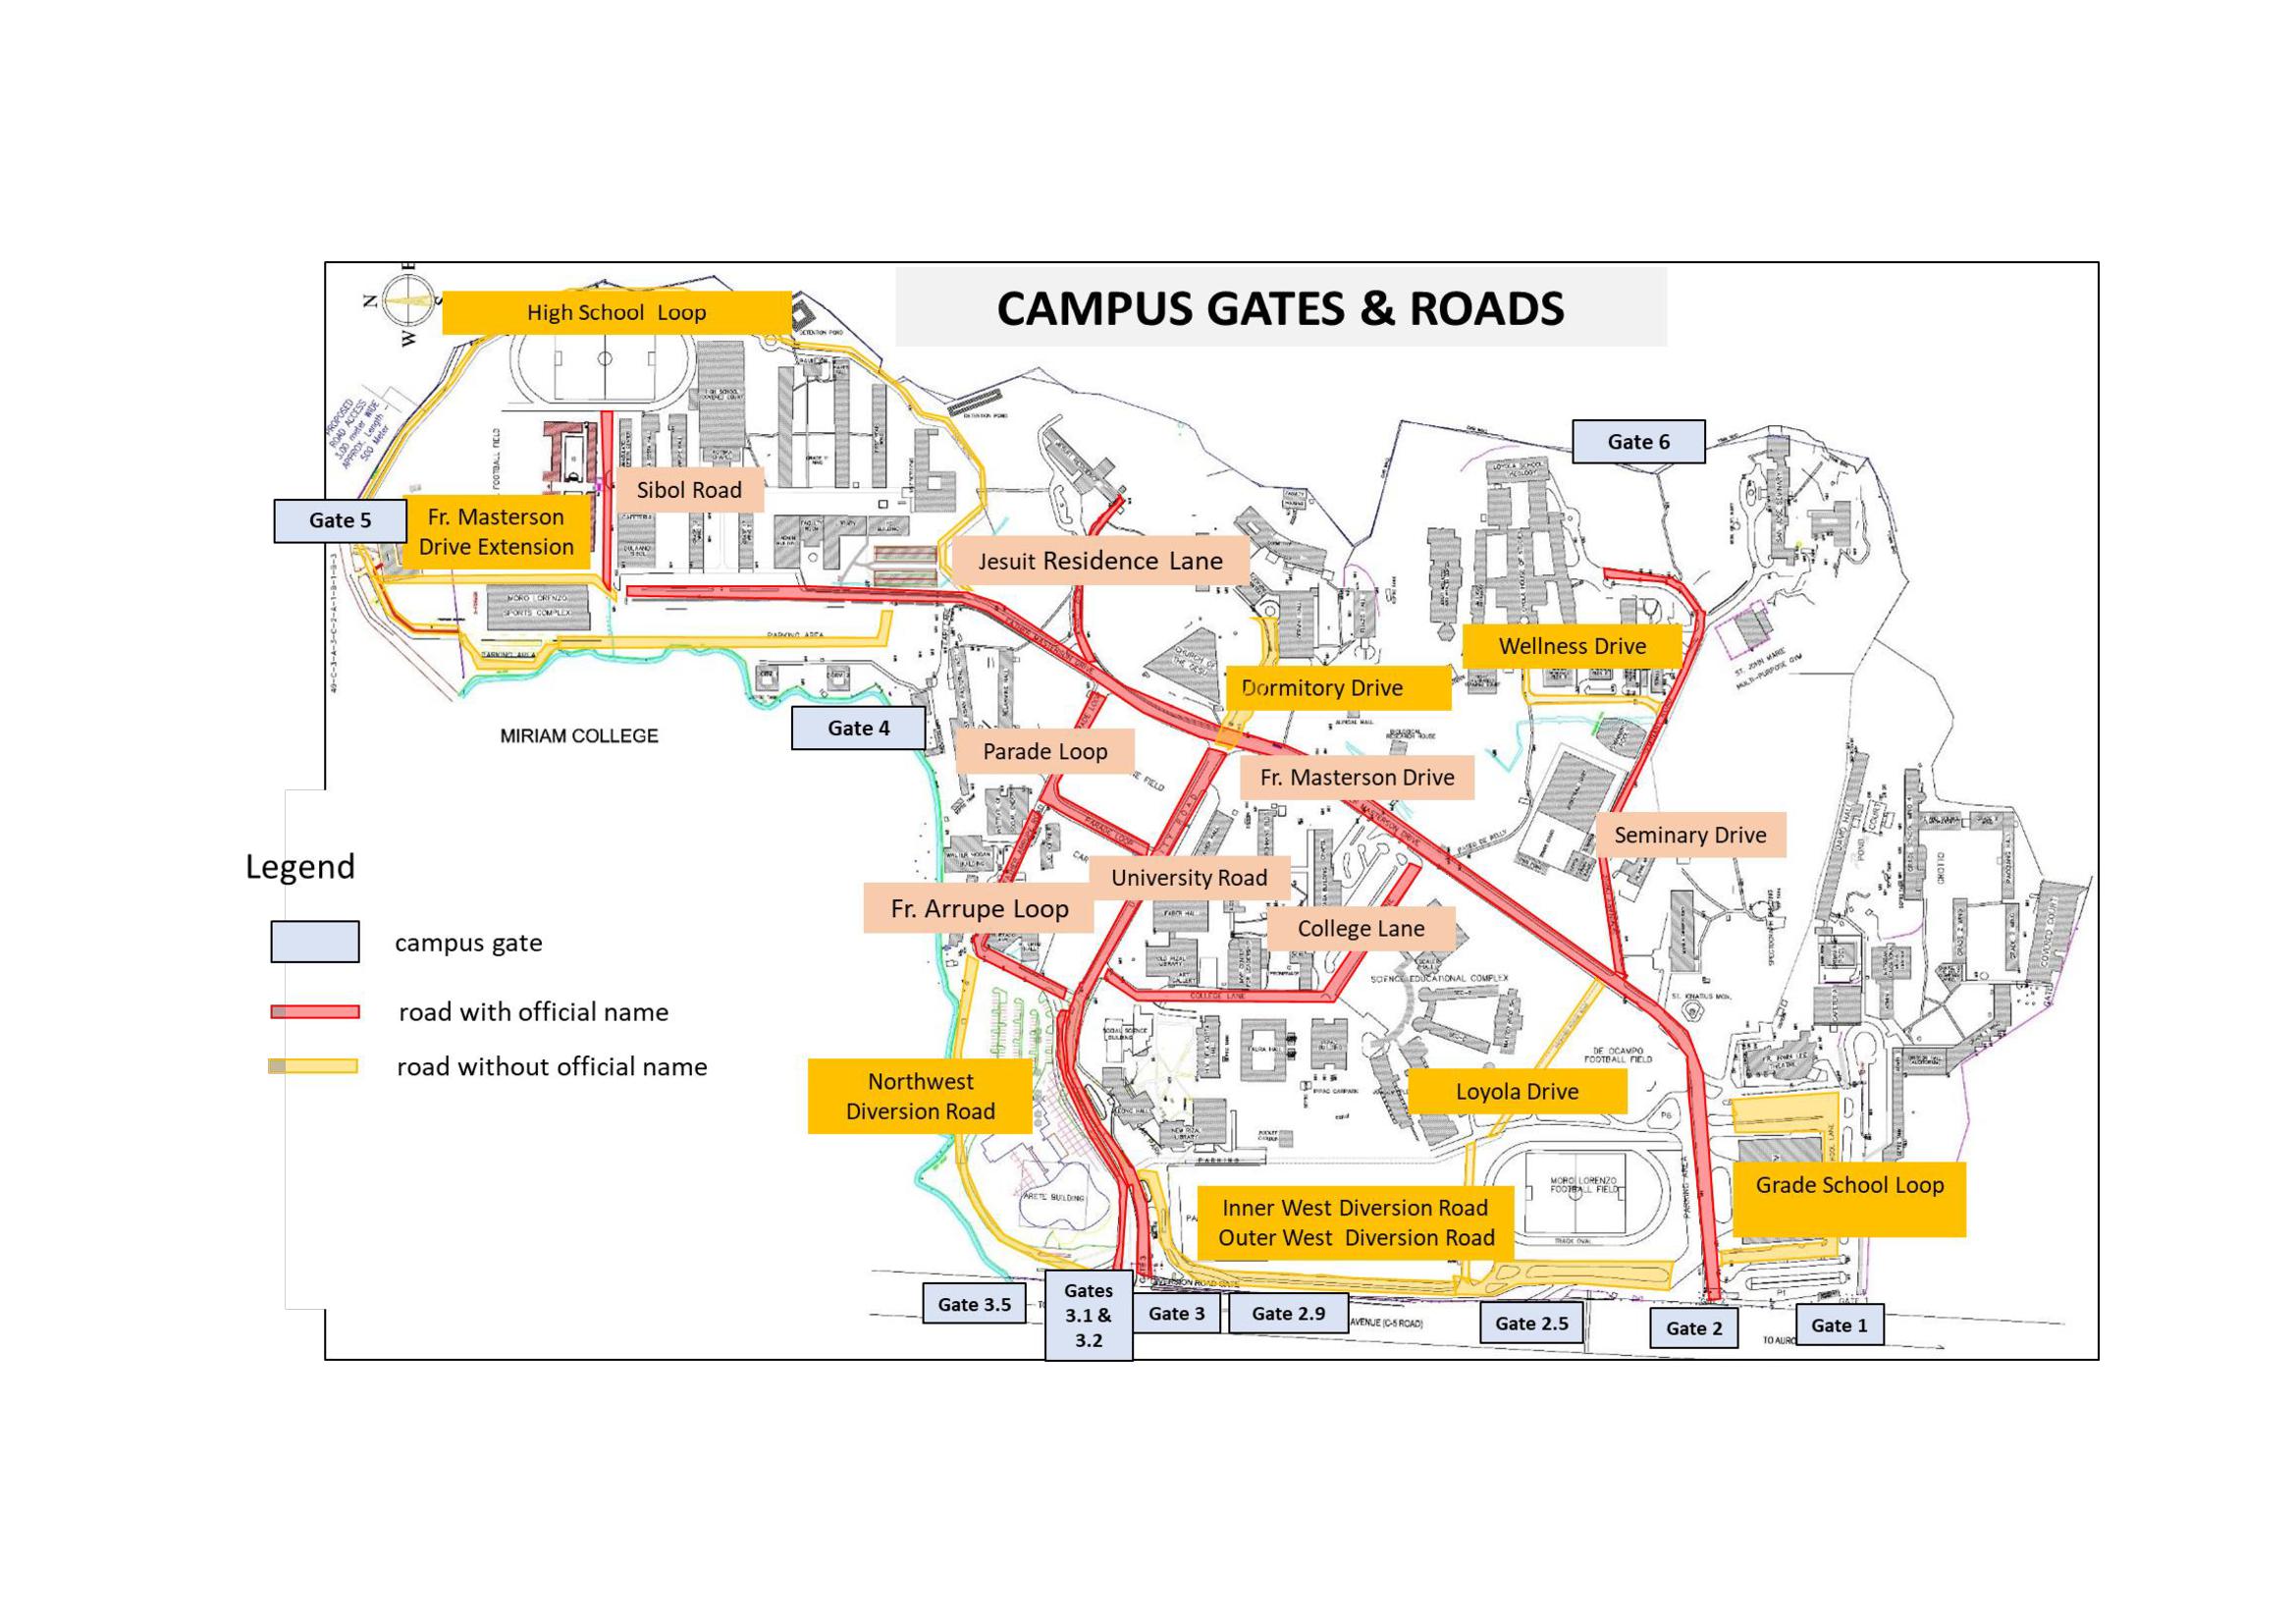 Loyola Heights campus road and gate names